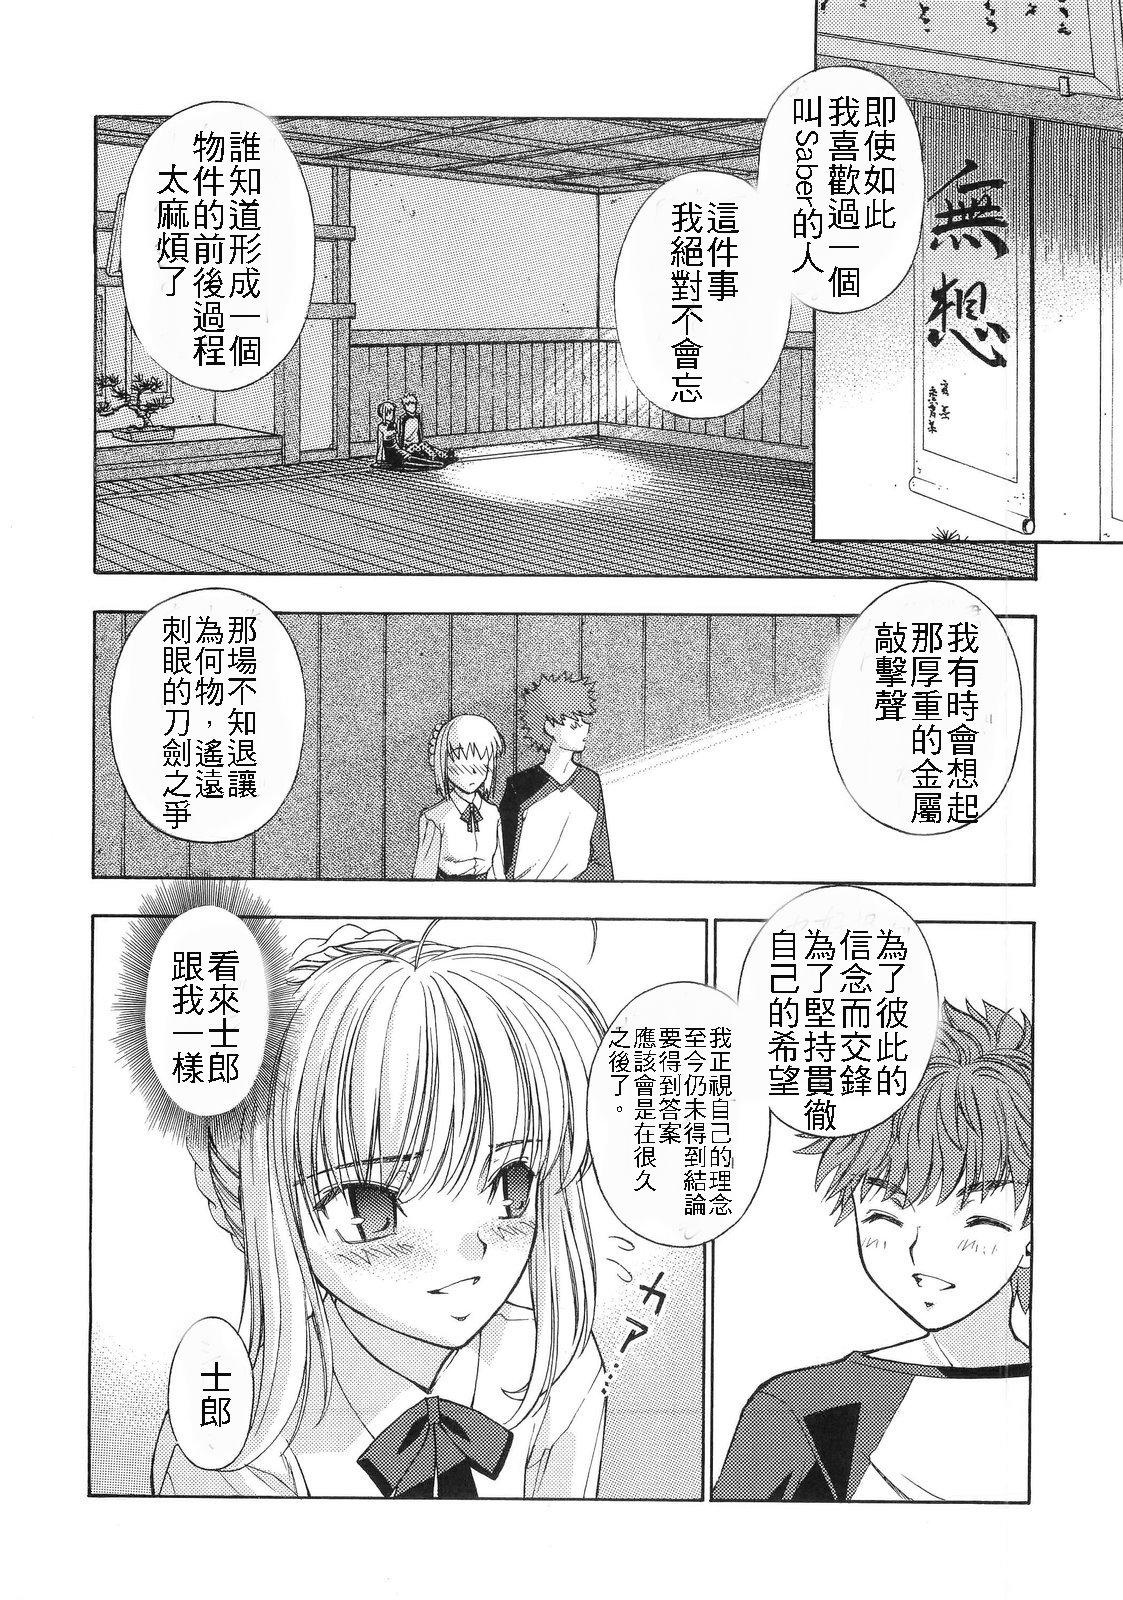 Vecina HUNGRY LOVER - Fate stay night Dildo - Page 69